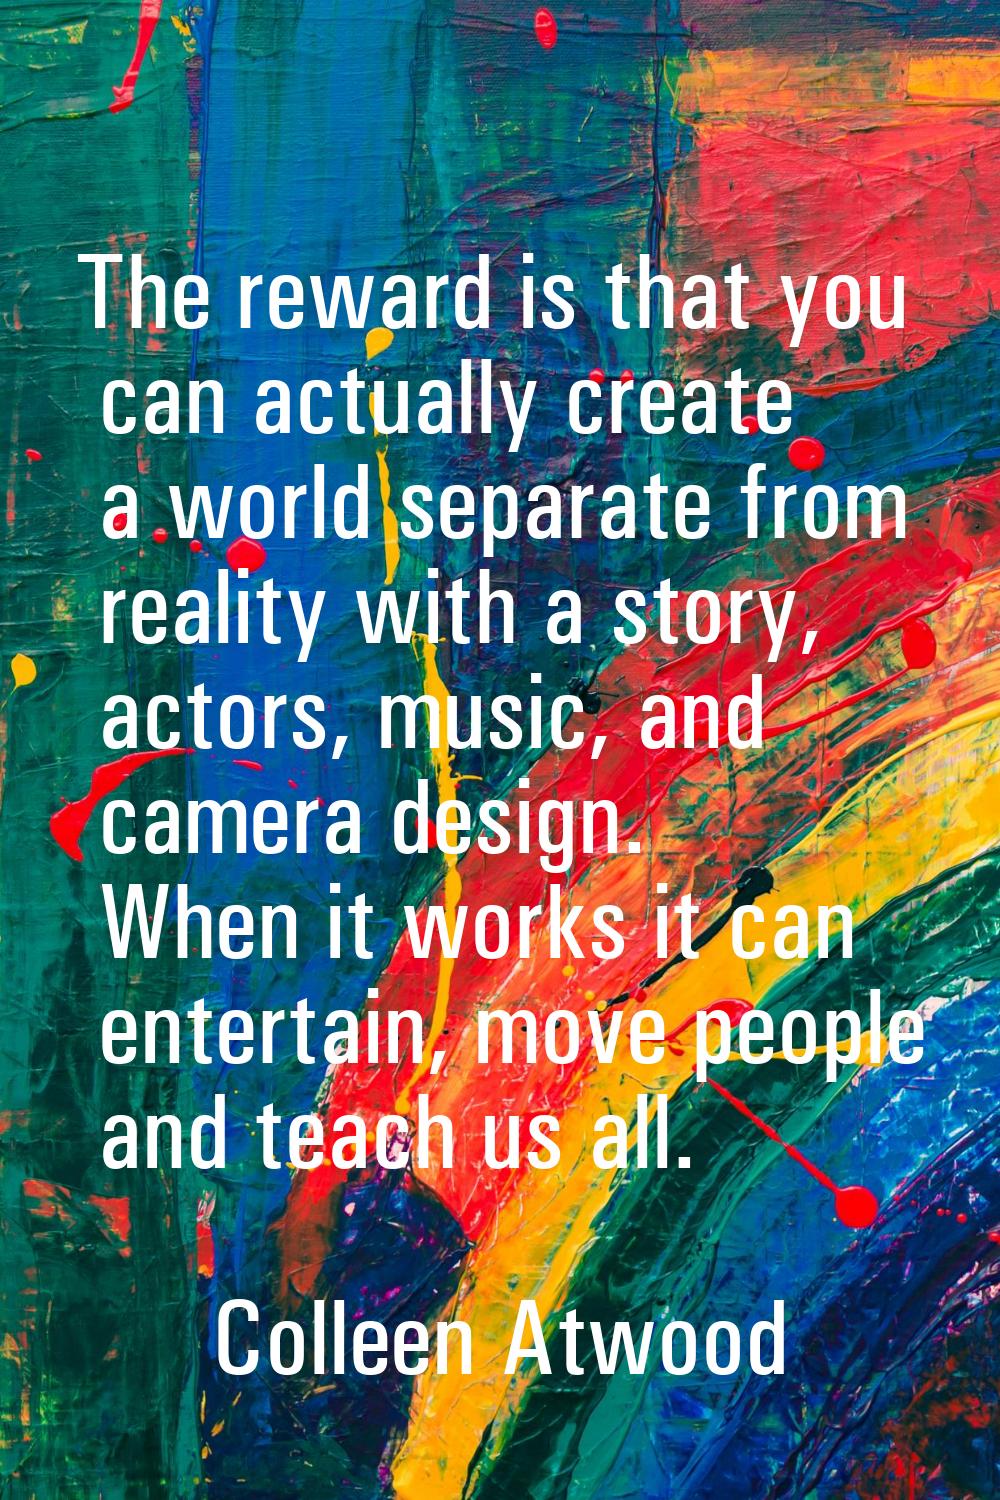 The reward is that you can actually create a world separate from reality with a story, actors, musi